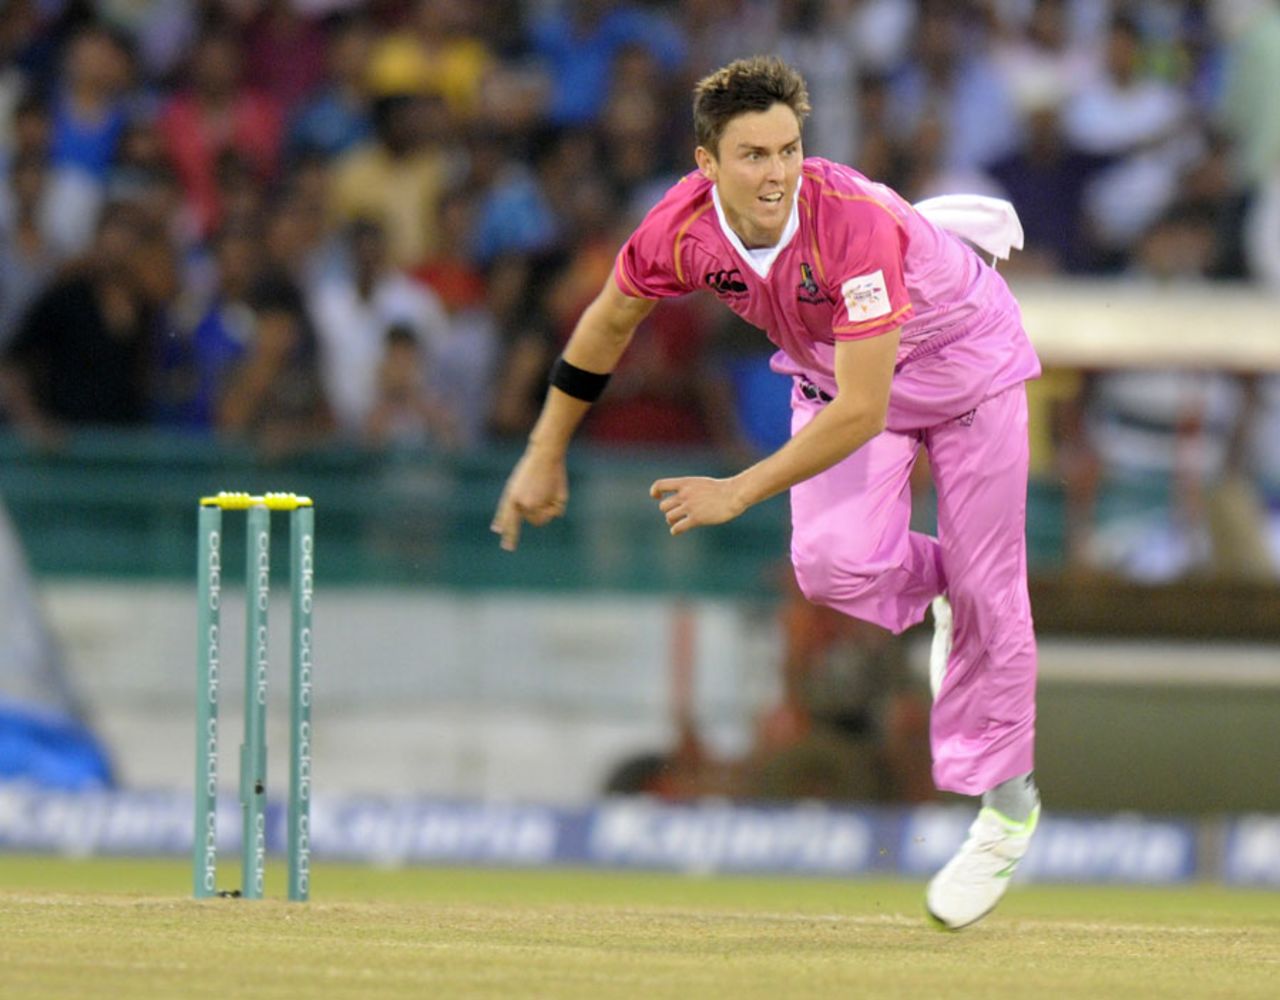 Trent Boult hurls in a delivery, Northern Knights v Southern Express, CLT20 qualifier, Raipur, September 13, 2014